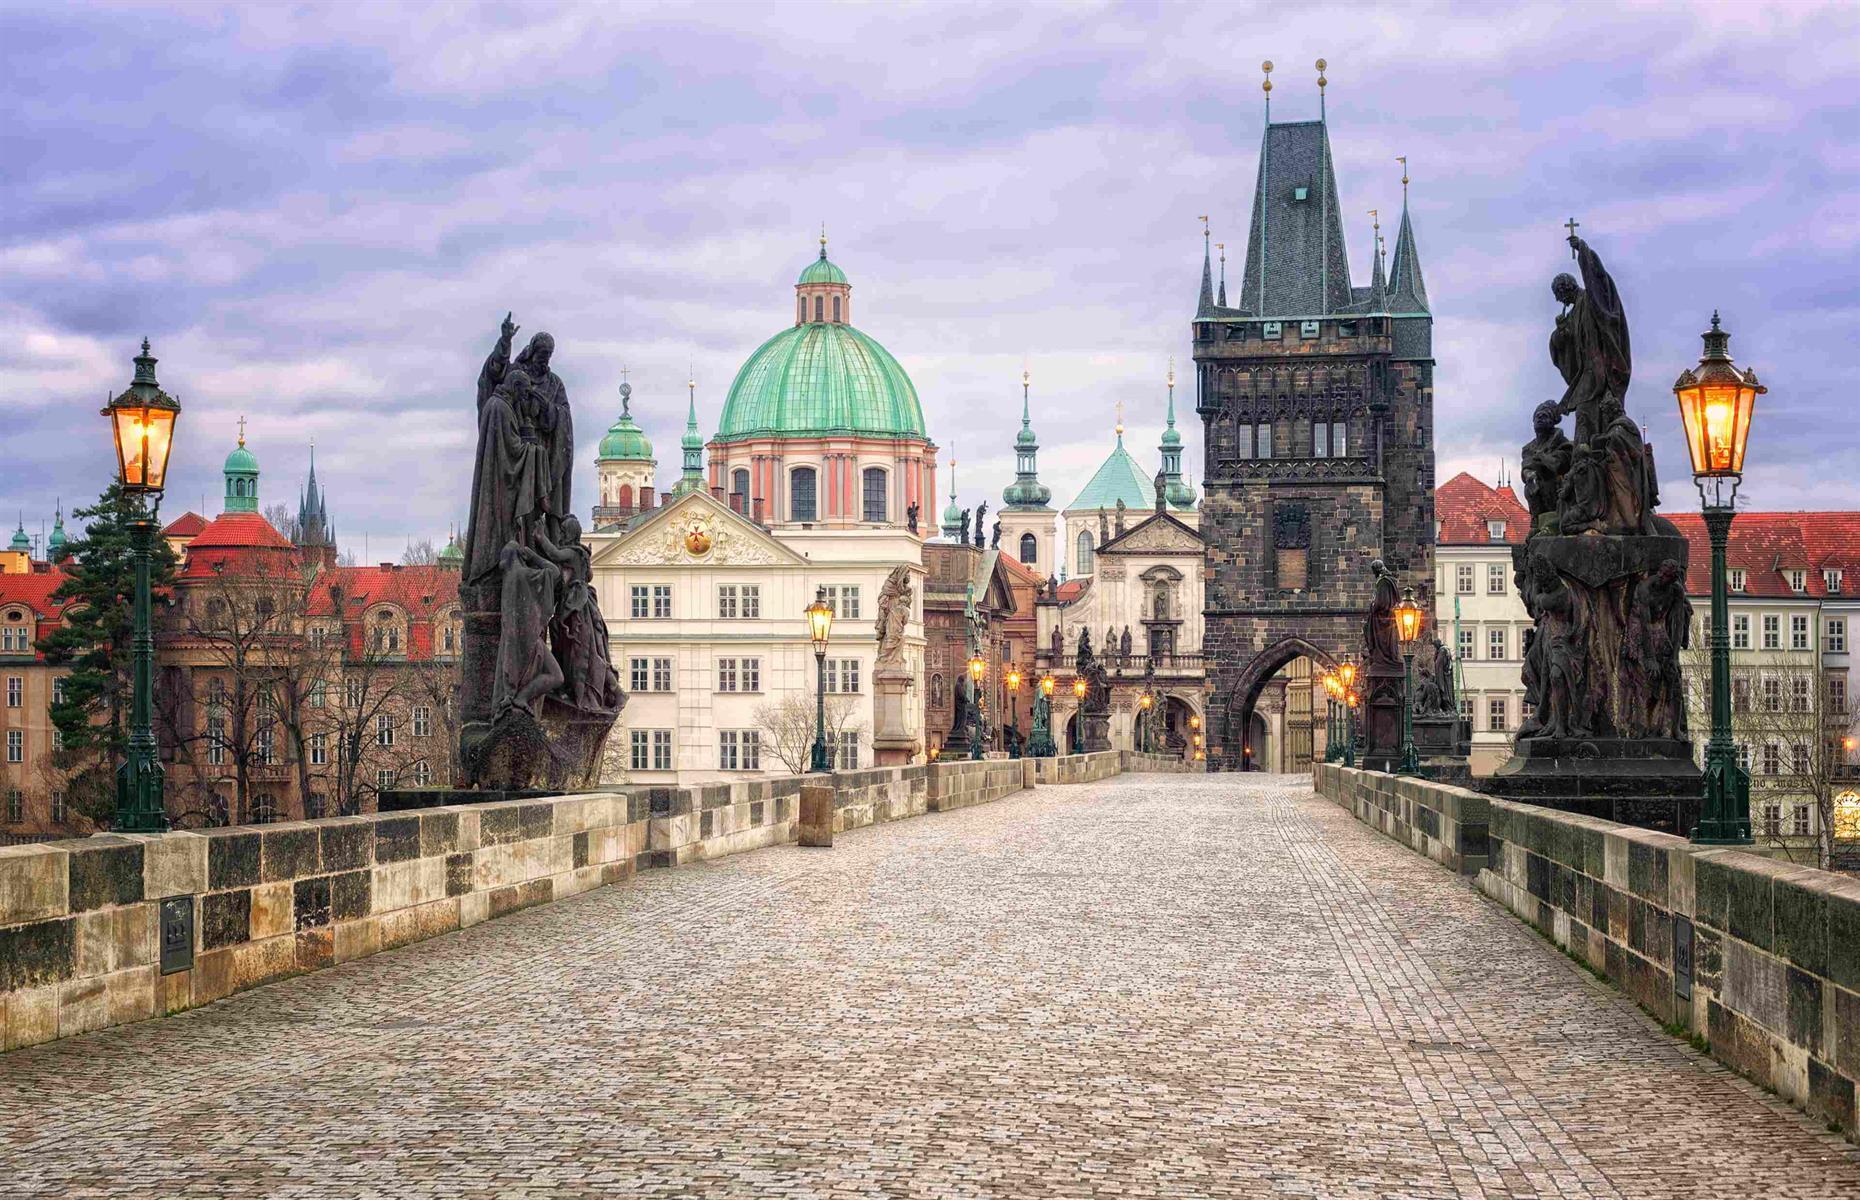 <p>Charles Bridge is one of Prague’s most-loved tourist attractions, with locals and tourists crossing the 1,700-foot (515m) bridge every day. A tourist driving a white Audi was seen (not that it was hard to miss) <a href="https://www.euronews.com/travel/2022/09/14/watch-as-a-tourist-illegally-drives-over-pragues-iconic-charles-bridge-then-gets-fined">mounting the pavement on Mostecká Street and driving across the 15th-century bridge</a>. The unnamed man managed to dodge confused pedestrians and sandstone statues of saints before parking in a paid parking zone without paying. Needless to say, he incurred $244 of fines for his various offences.</p>